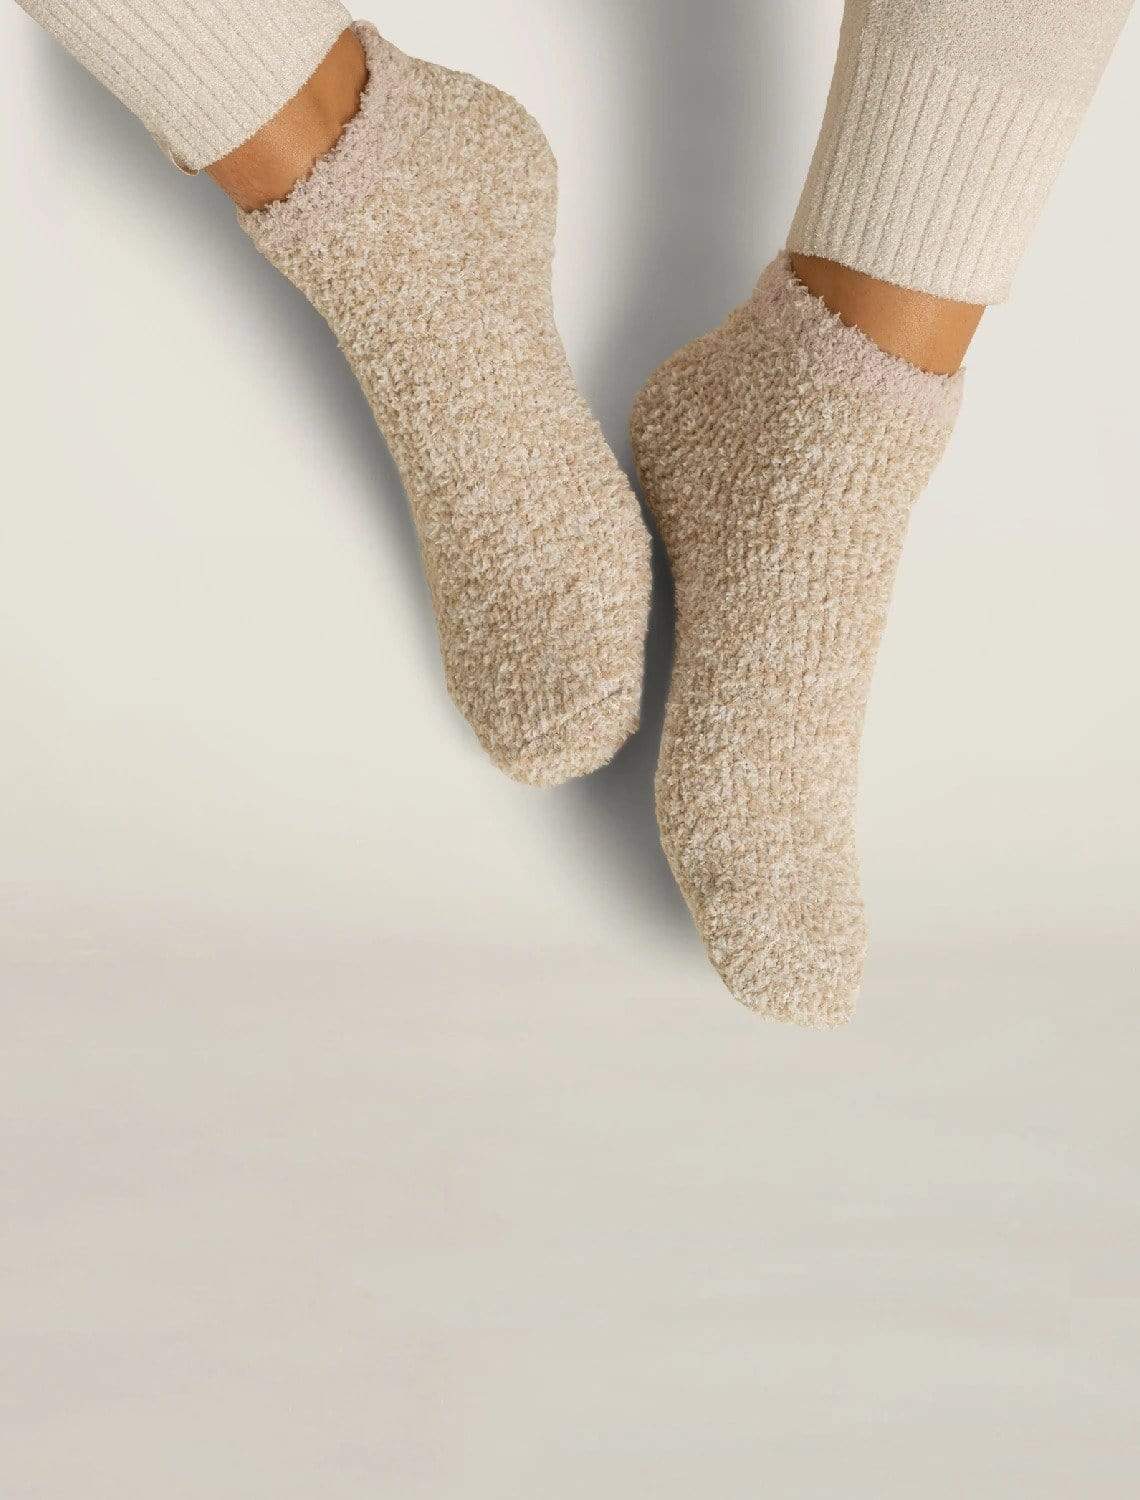 Barefoot Dreams CozyChic Socks - Support Local - Chico Support